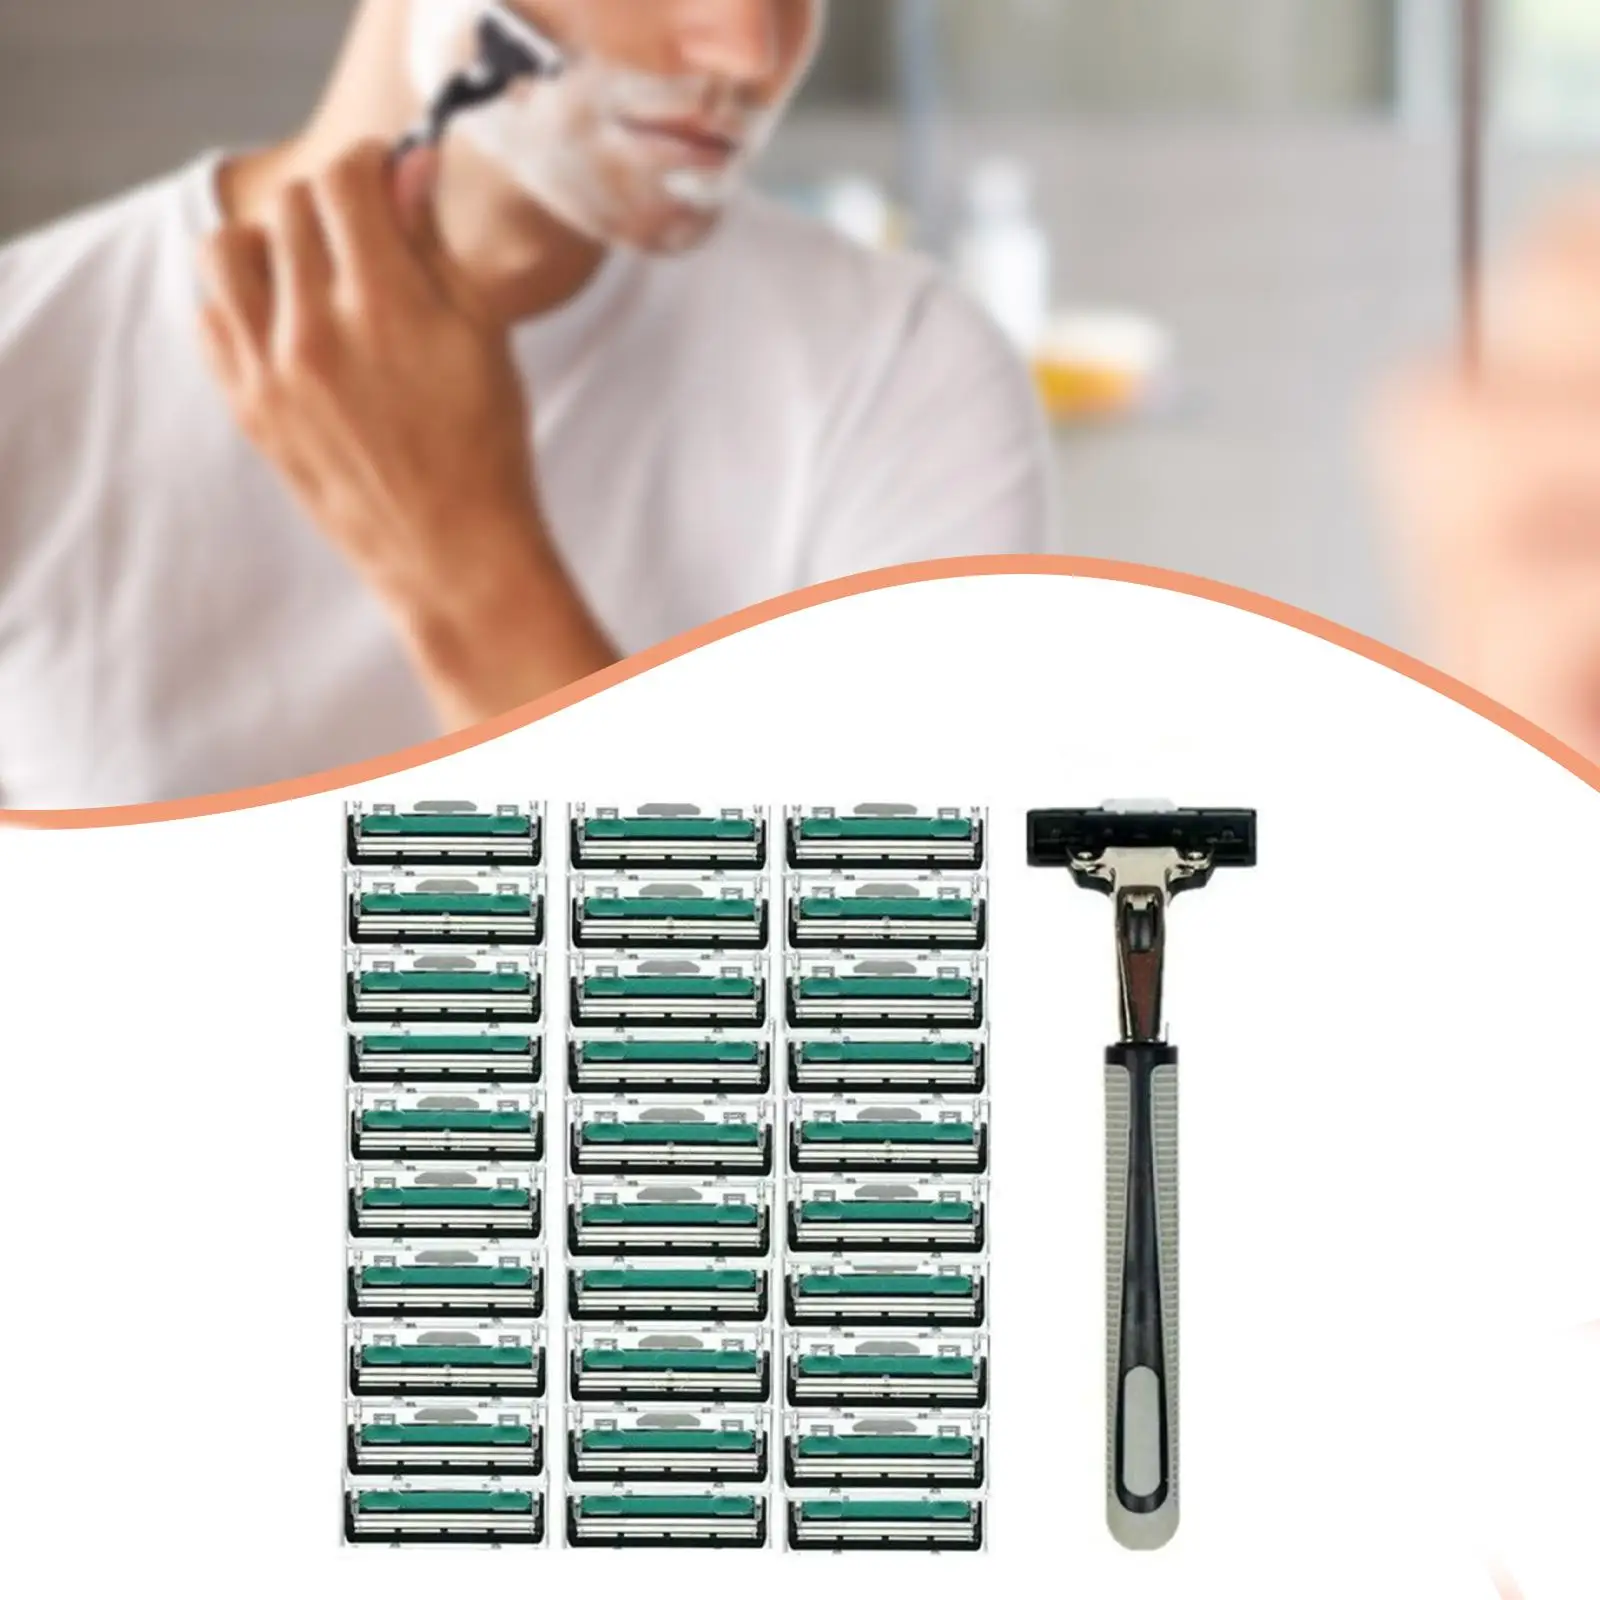 Stainless Steel Double Edge Shaver Face Shaving Anti Slip Handle Replaceable Rustproof Reusable Heavy Duty for Travel Salon Home